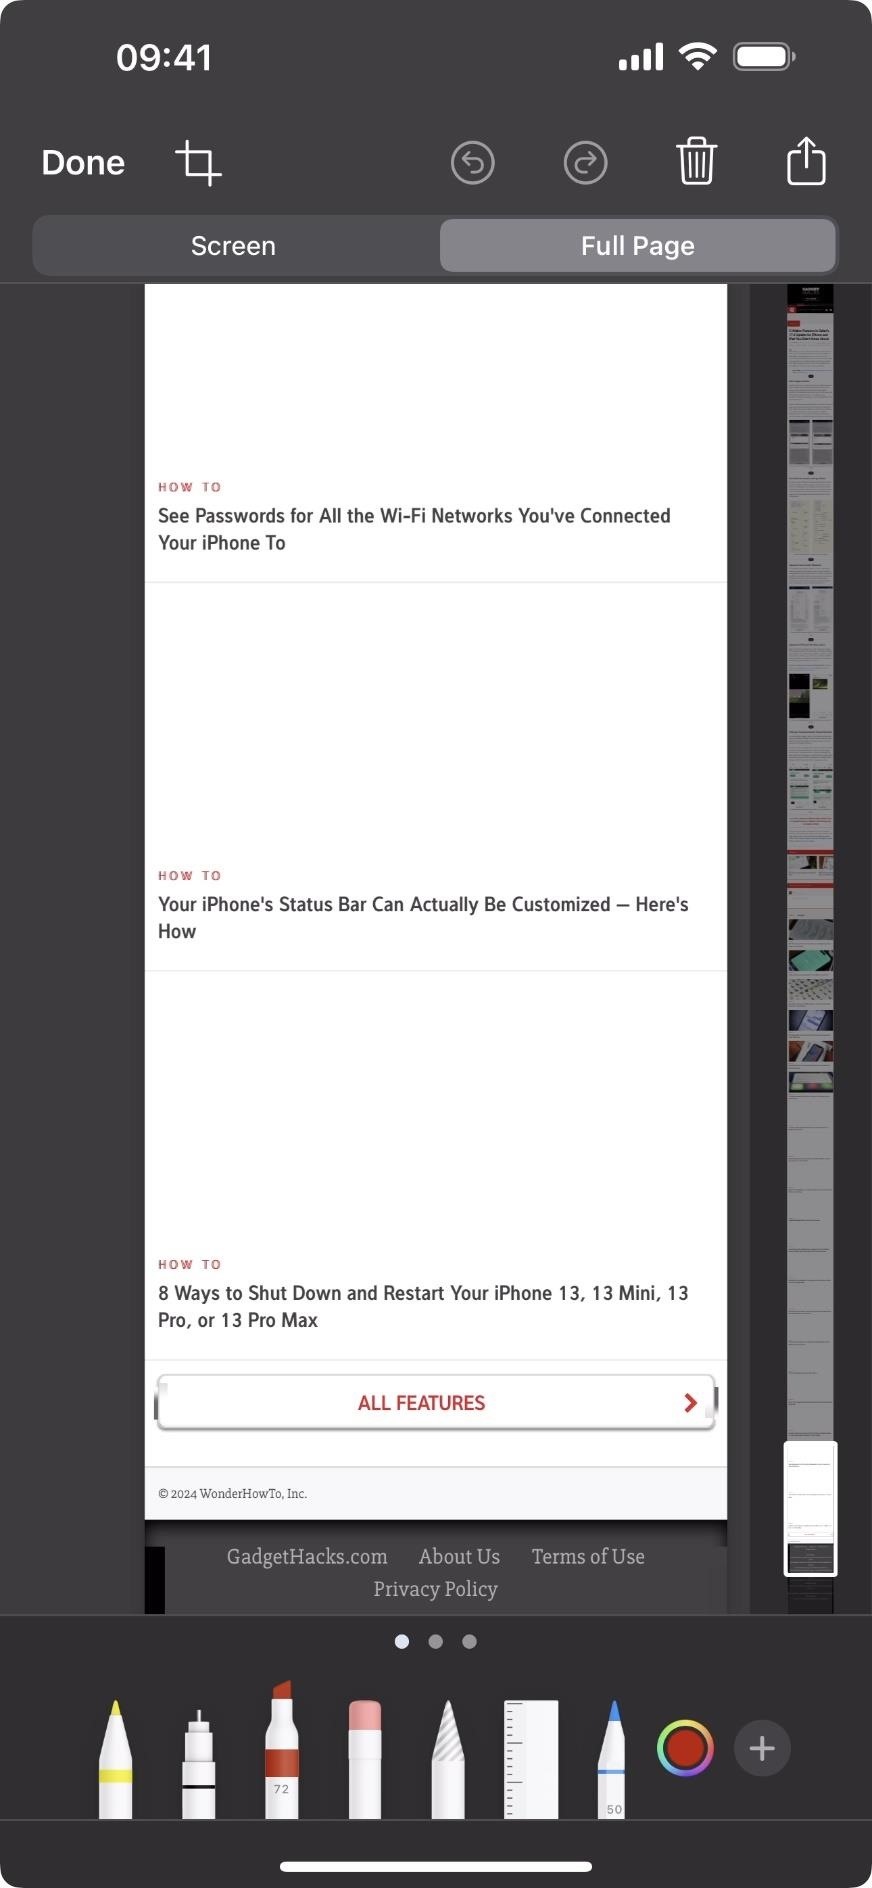 How to Take Scrolling Screenshots of Entire Webpages, Text Documents, and More on Your iPhone or iPad